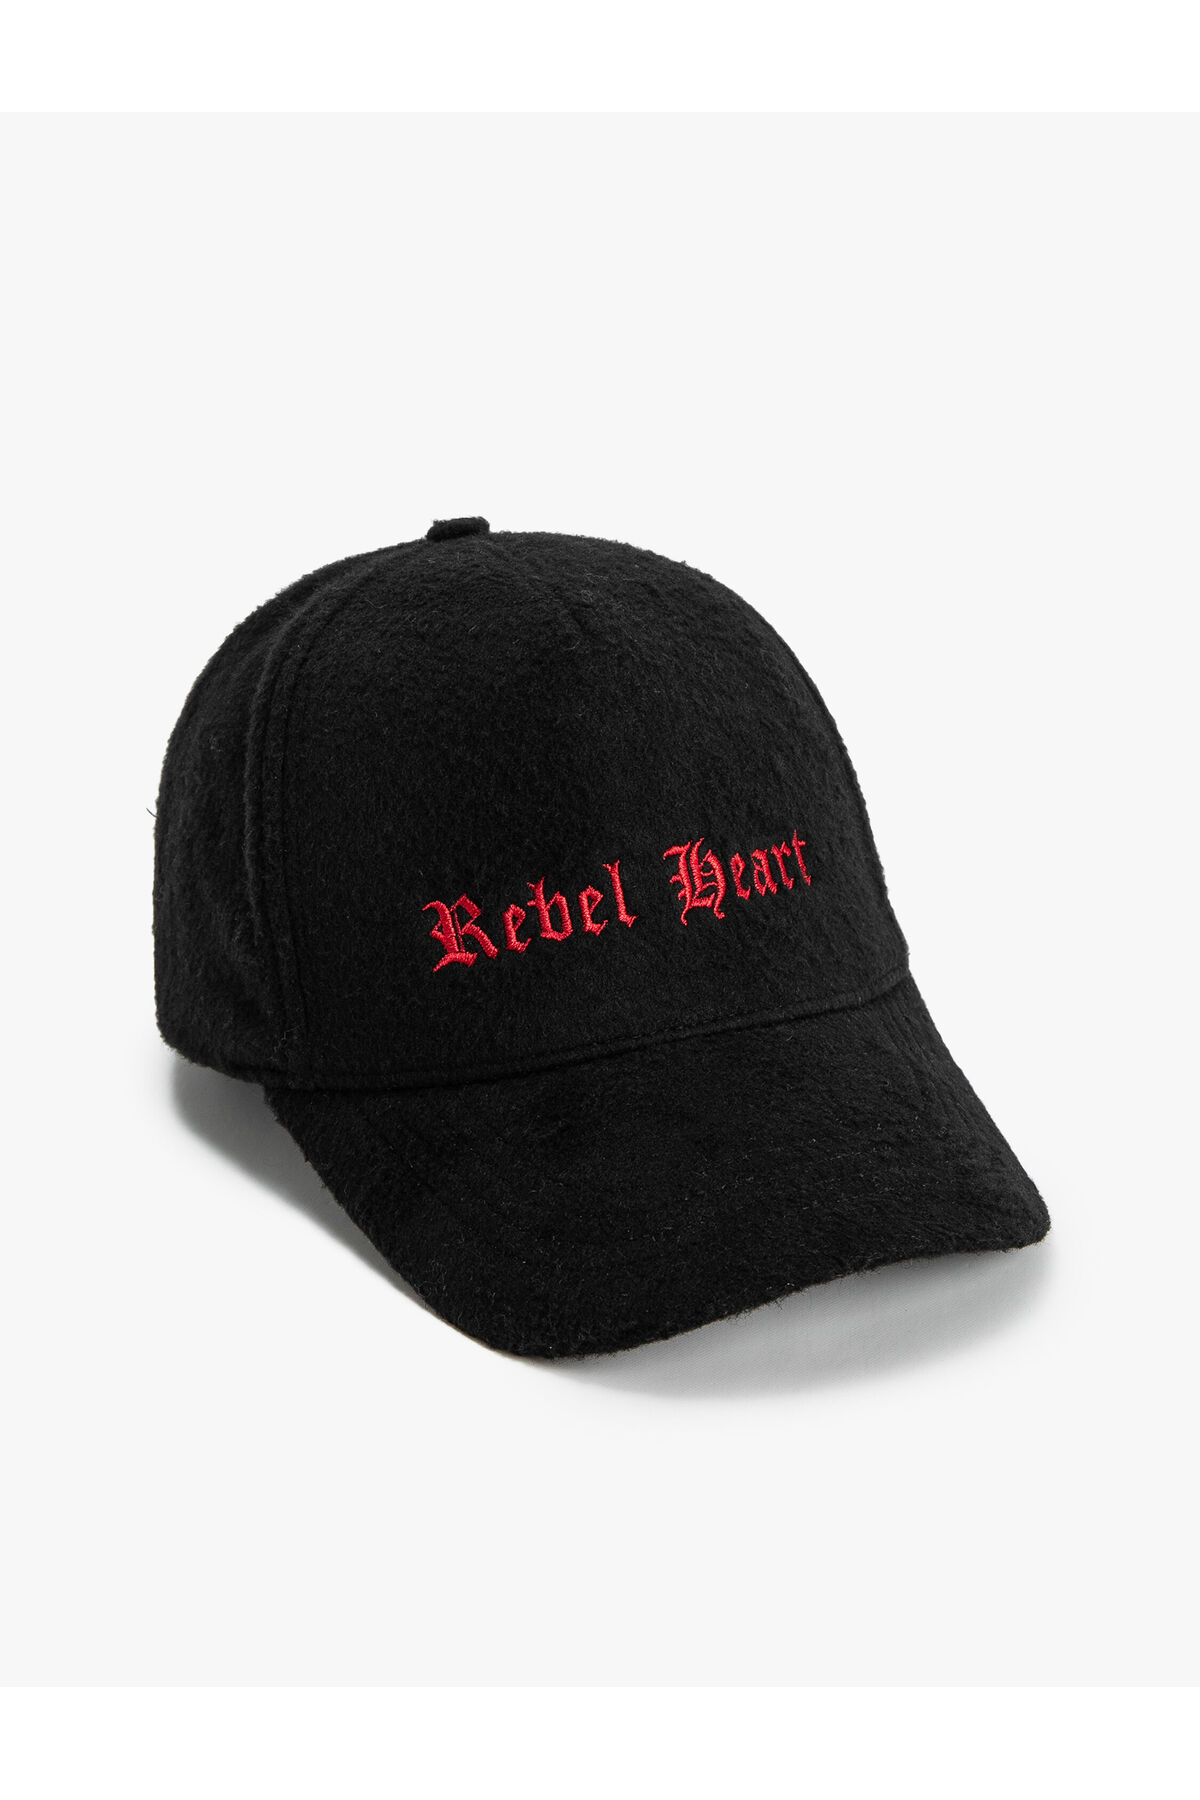 Koton Cap Hat Slogan Embroidered Wool Blended